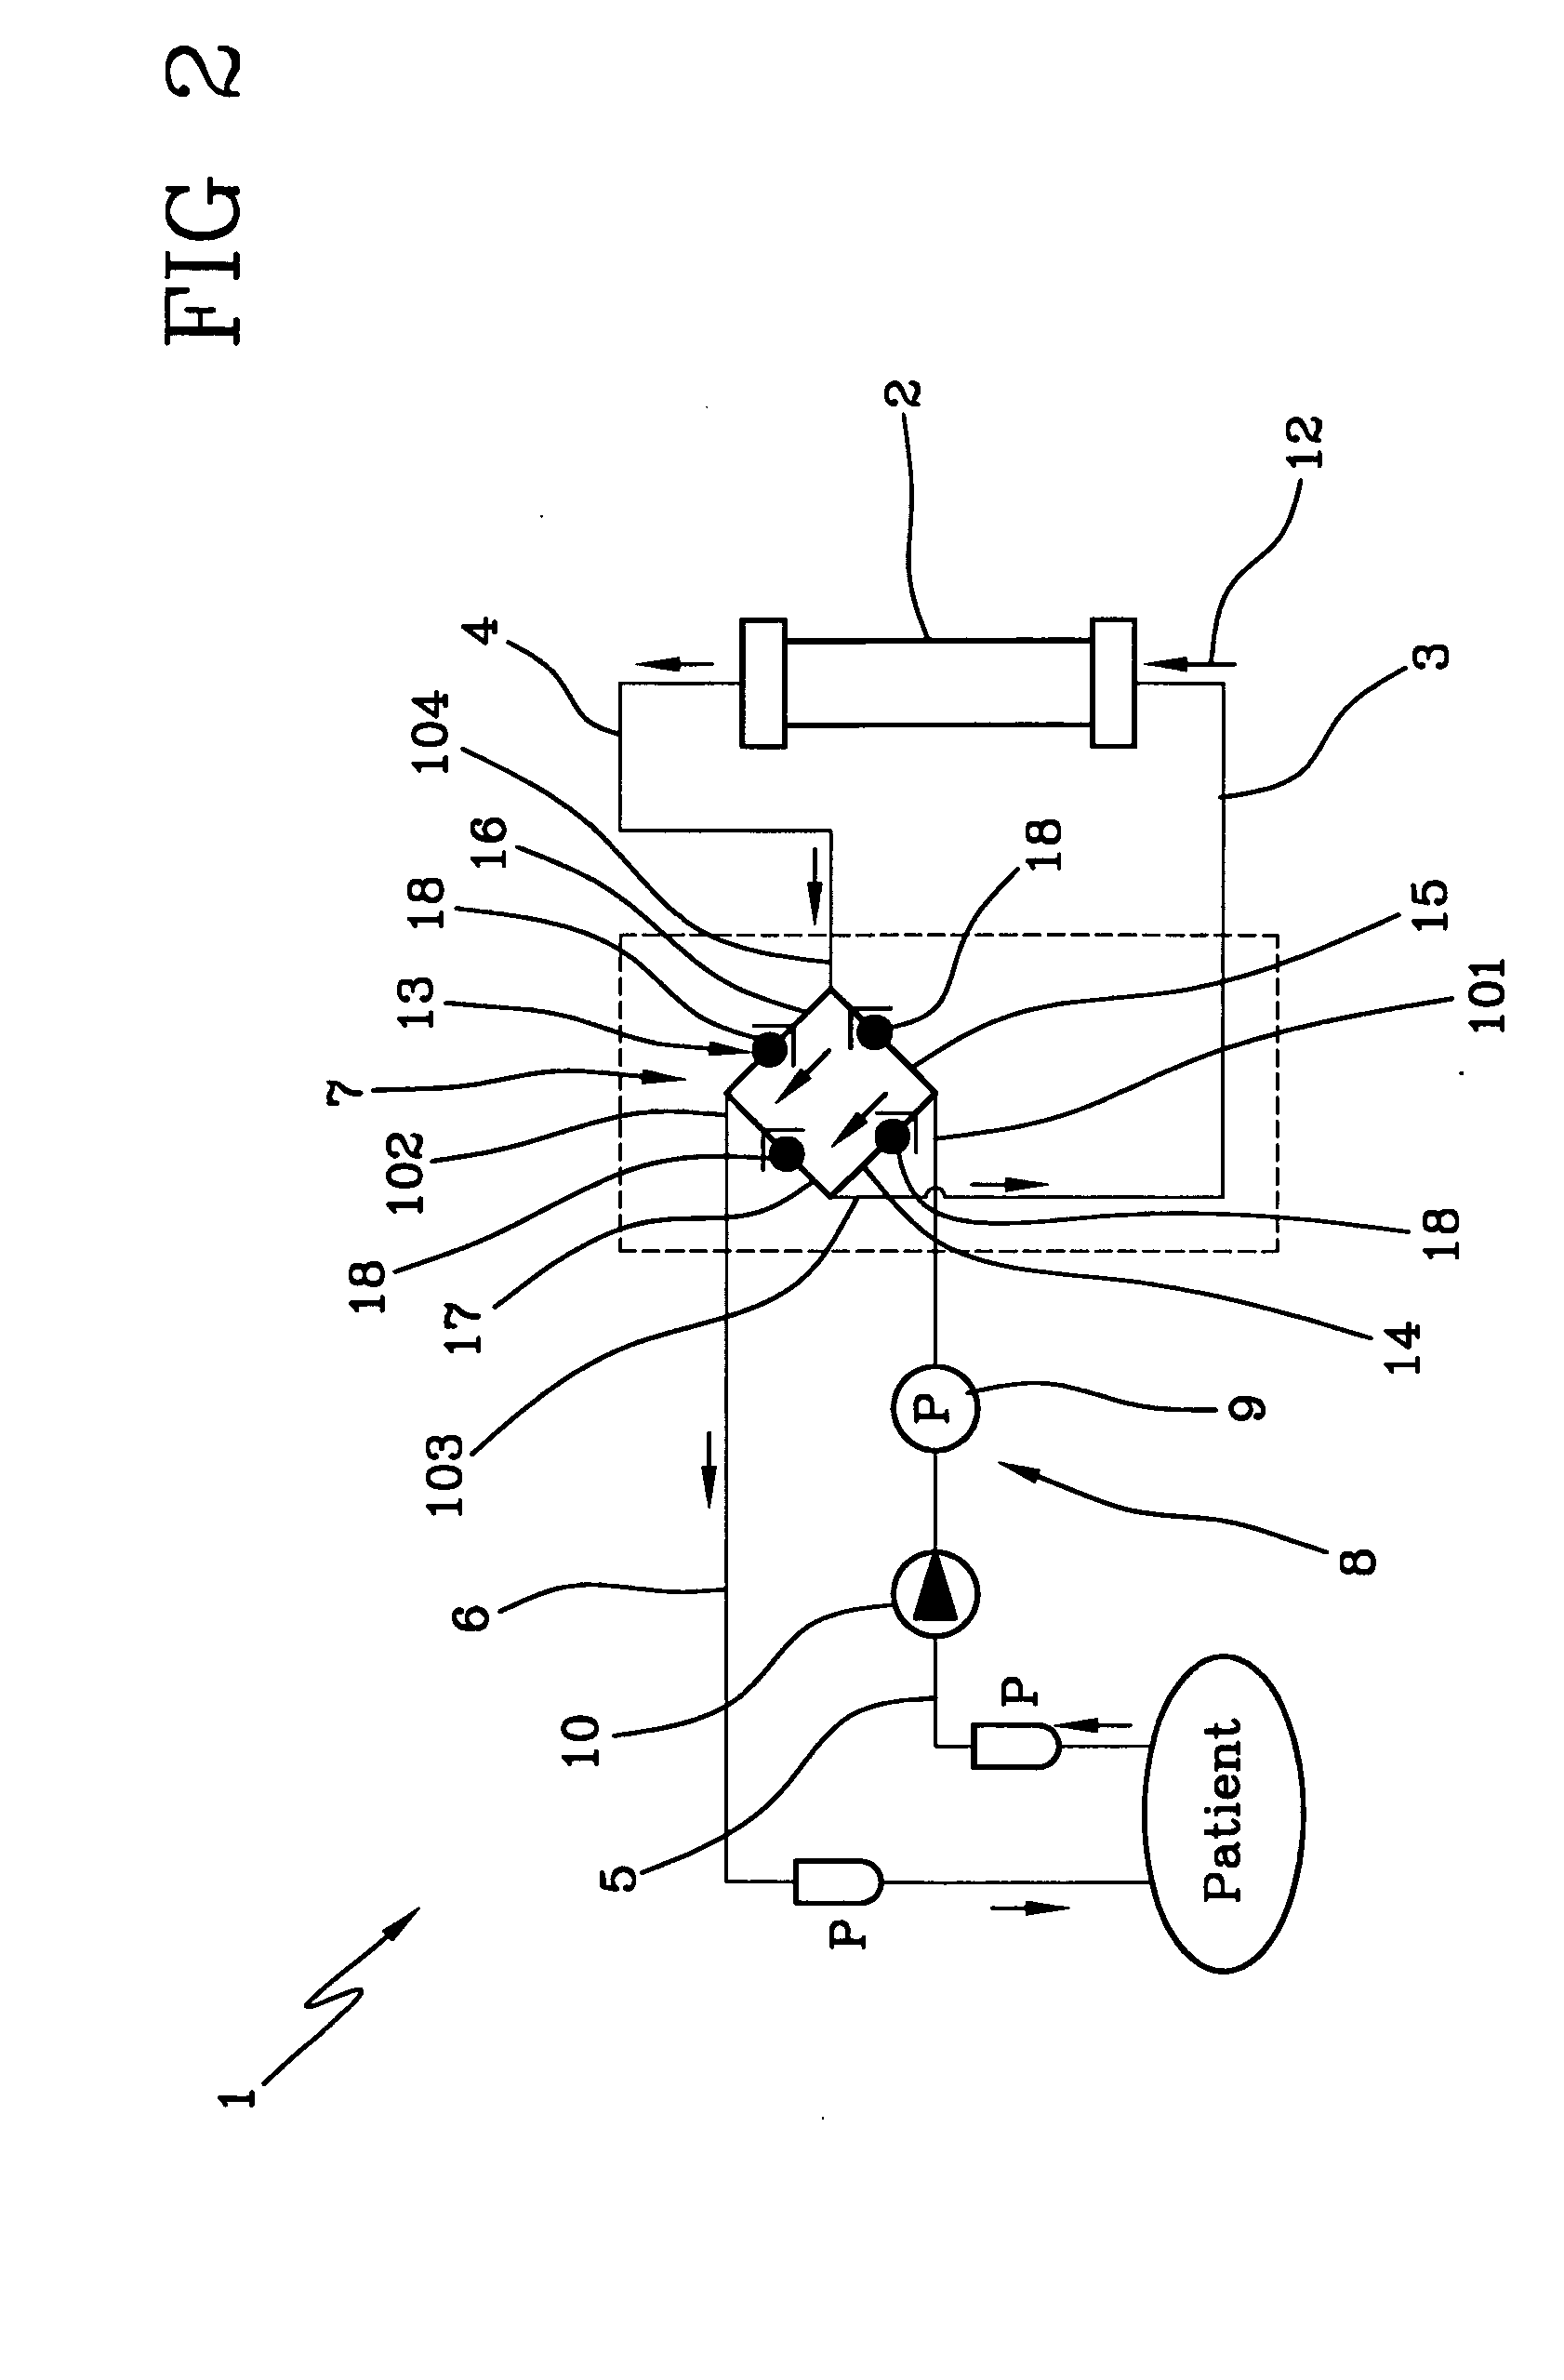 Circuit for extracorporeal blood treatment and flow-inverting device utilized therein